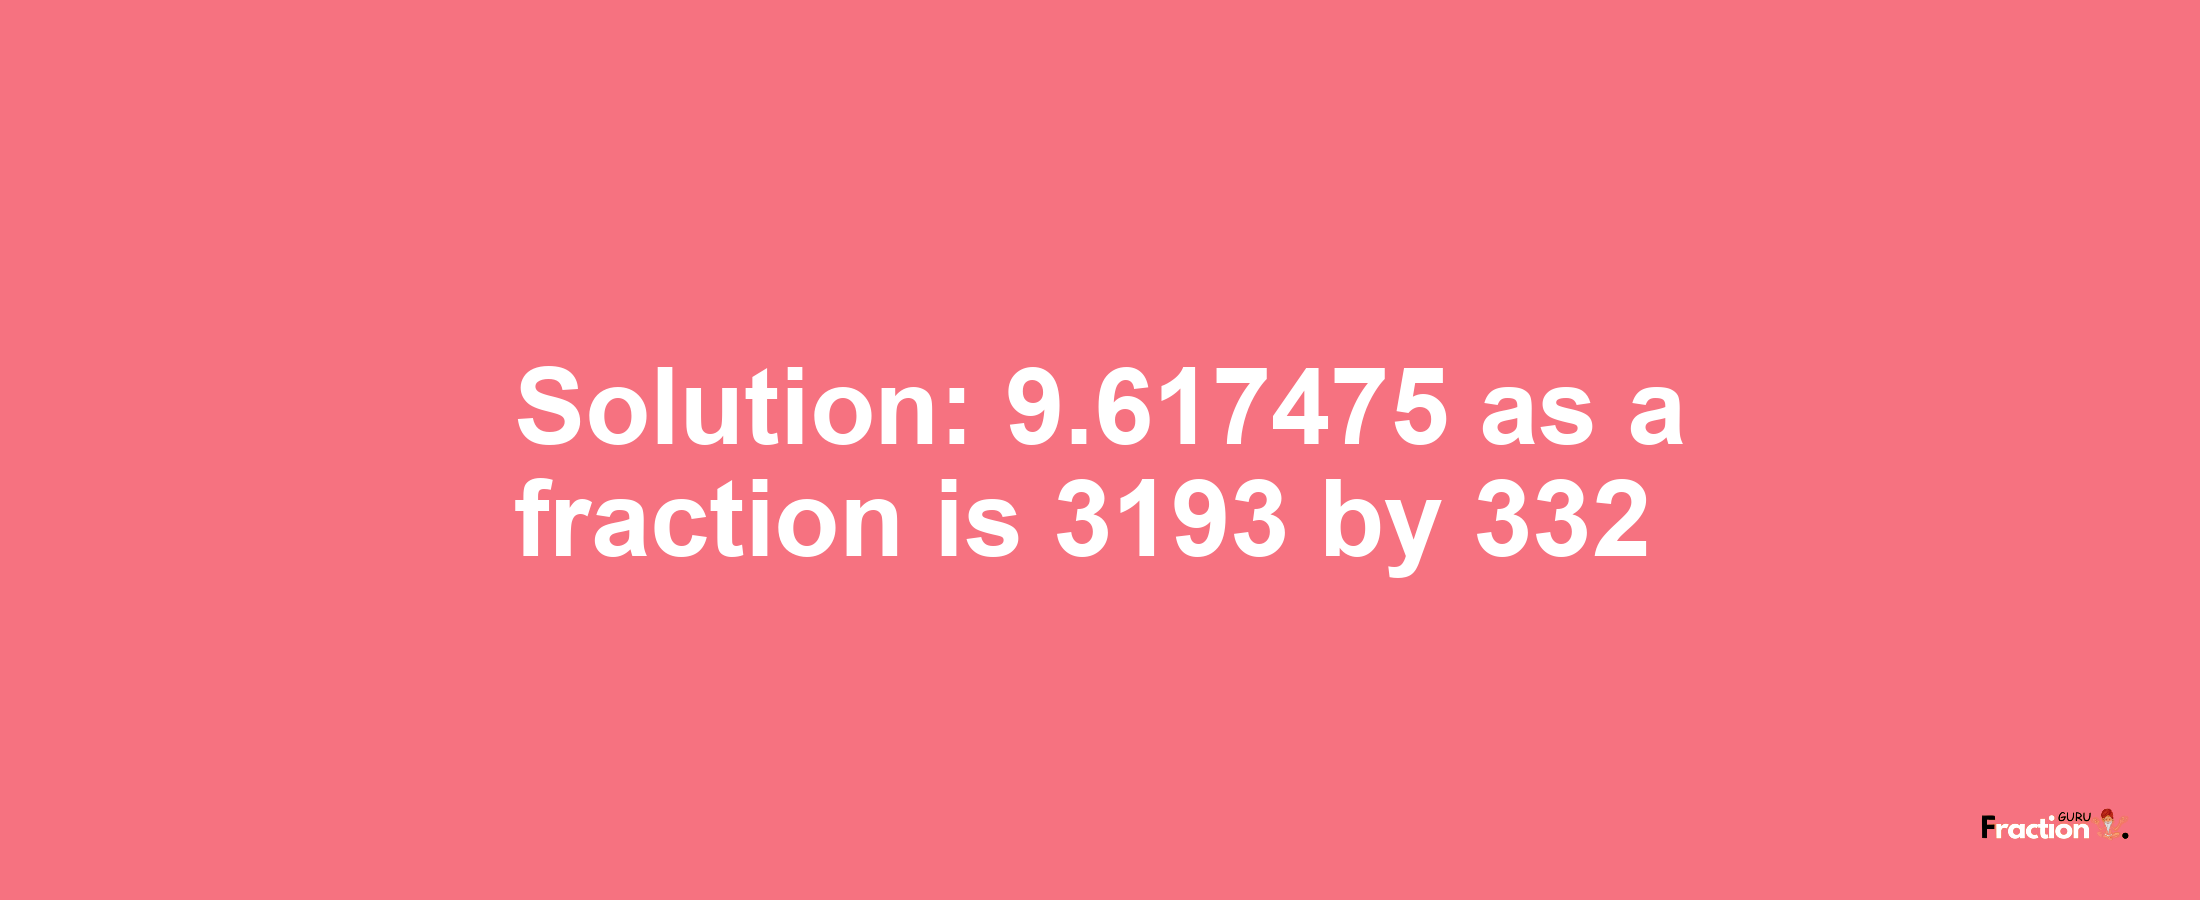 Solution:9.617475 as a fraction is 3193/332